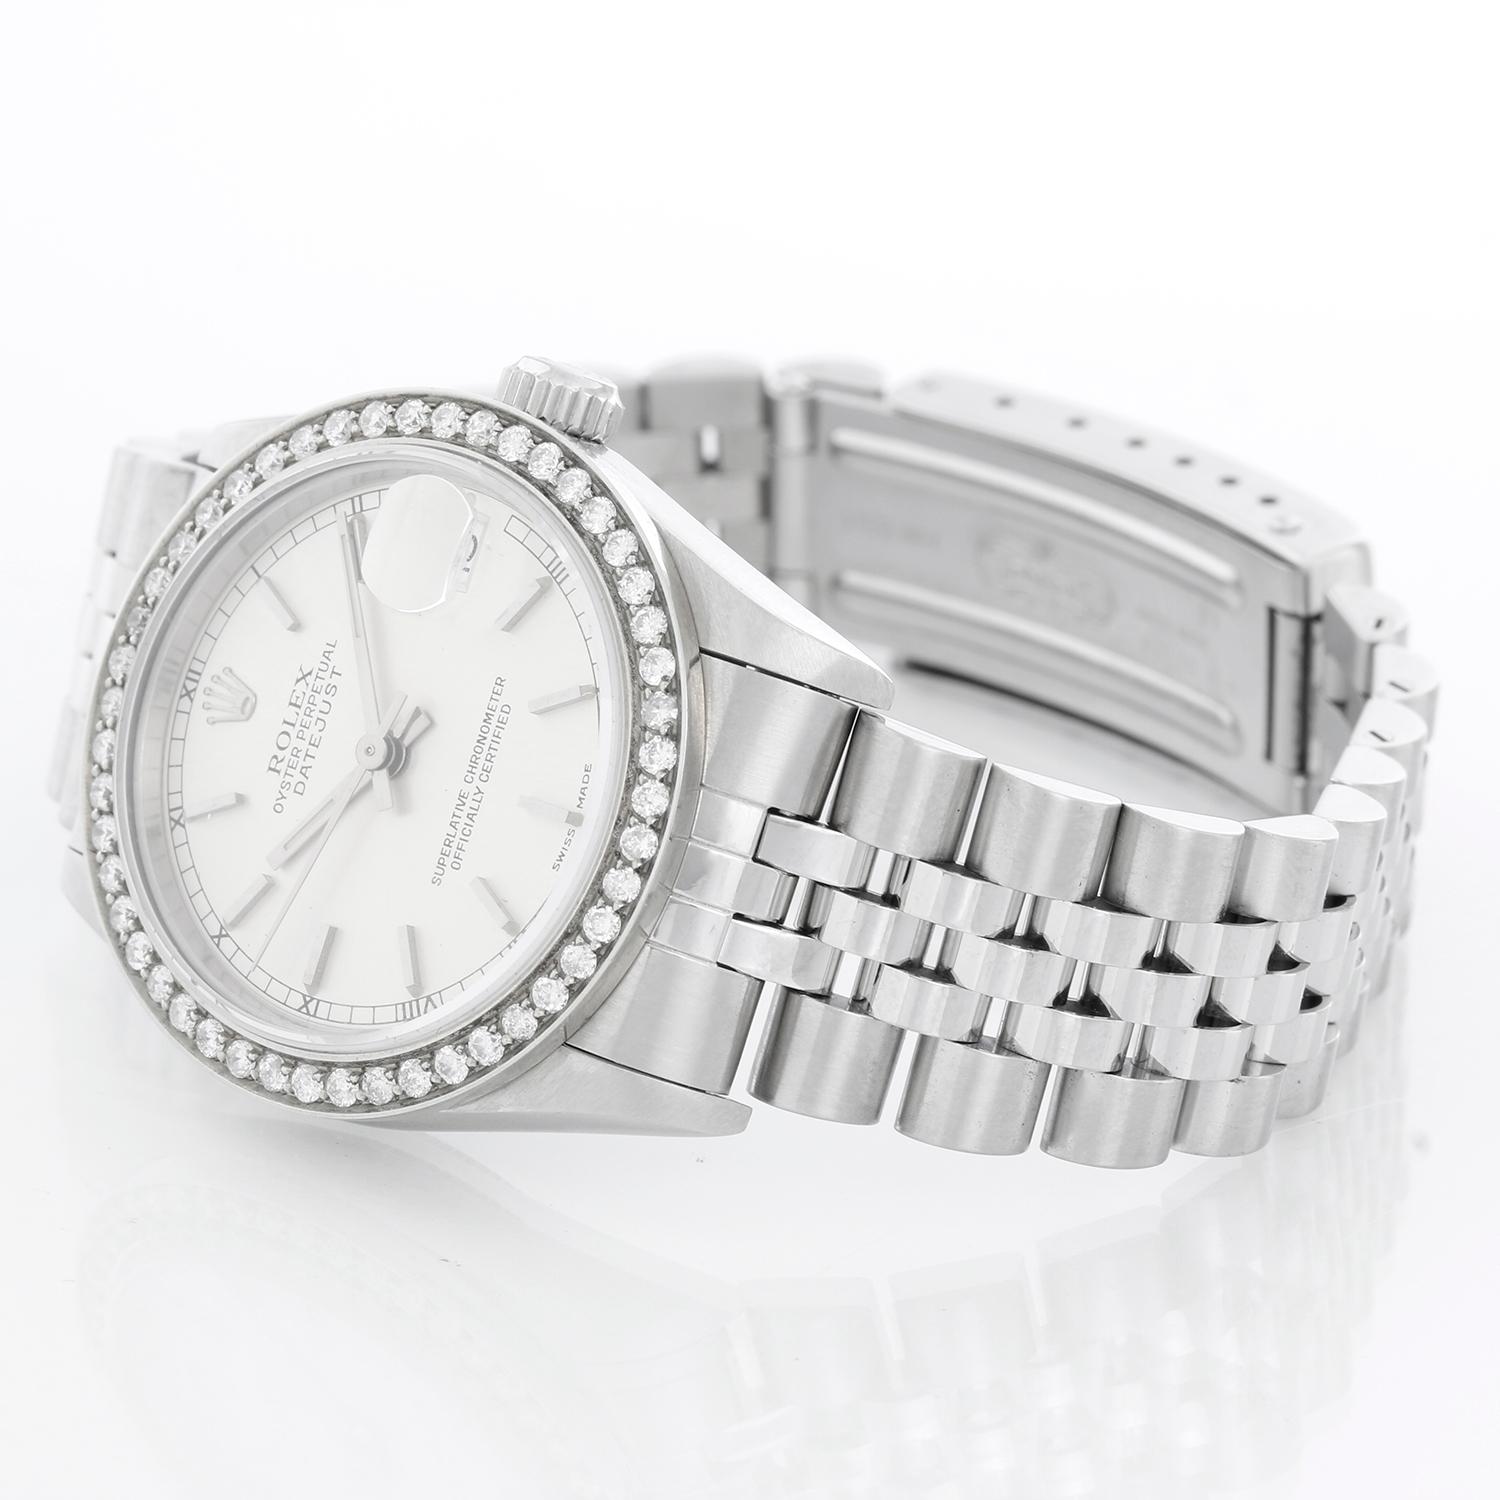 Rolex Datejust Midsize Men's or Ladies Steel Watch 68240 - Automatic winding, 29 jewels, Quickset date, sapphire crystal. Stainless steel case with custom diamond bezel (31mm diameter). Silver dial with stick hour markers. Stainless steel jubilee